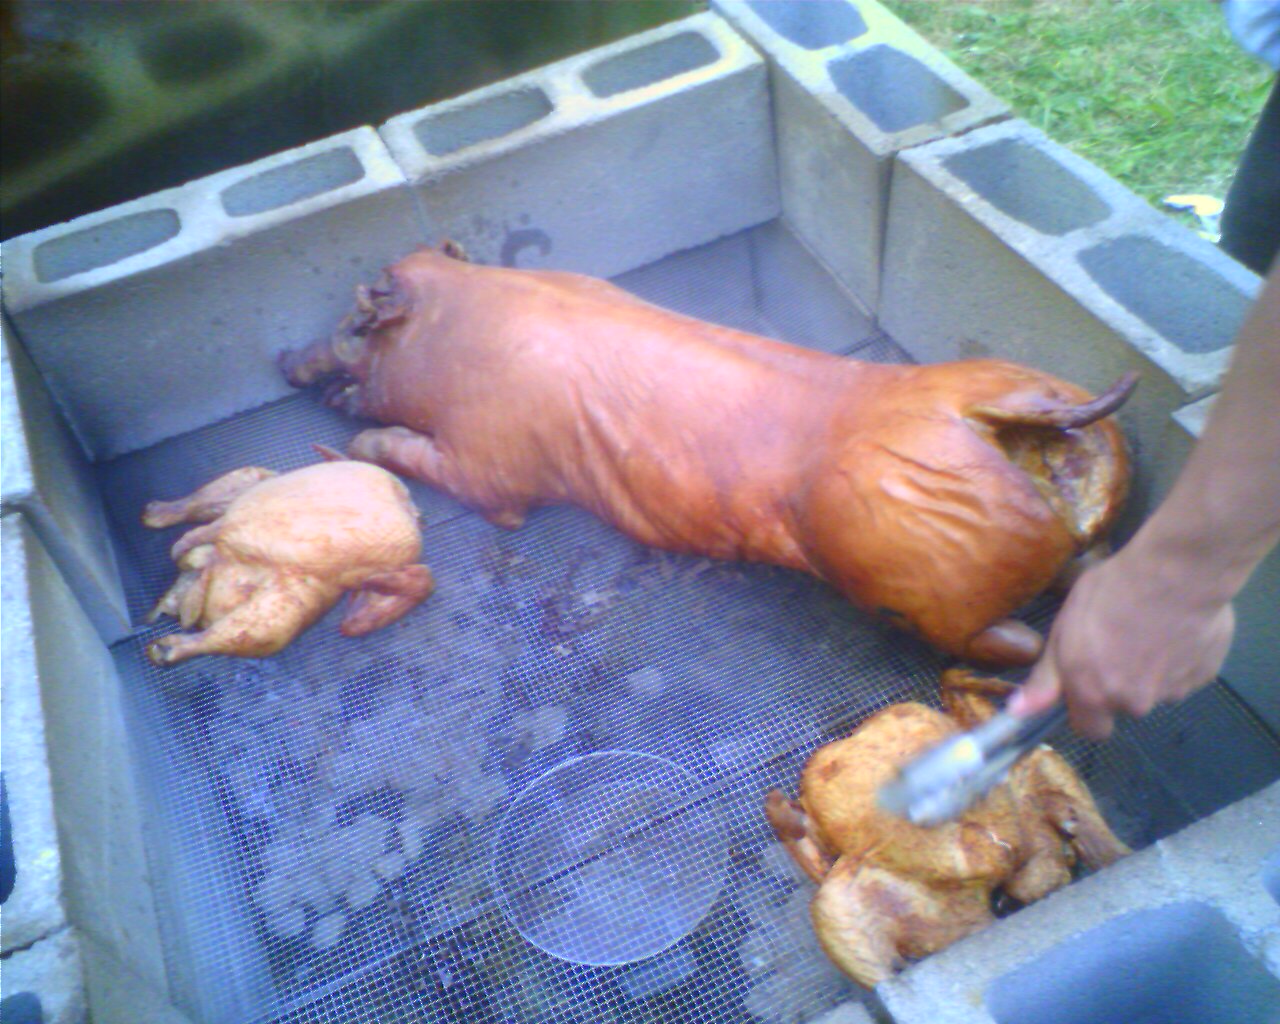 Mesquite pig at the bbq